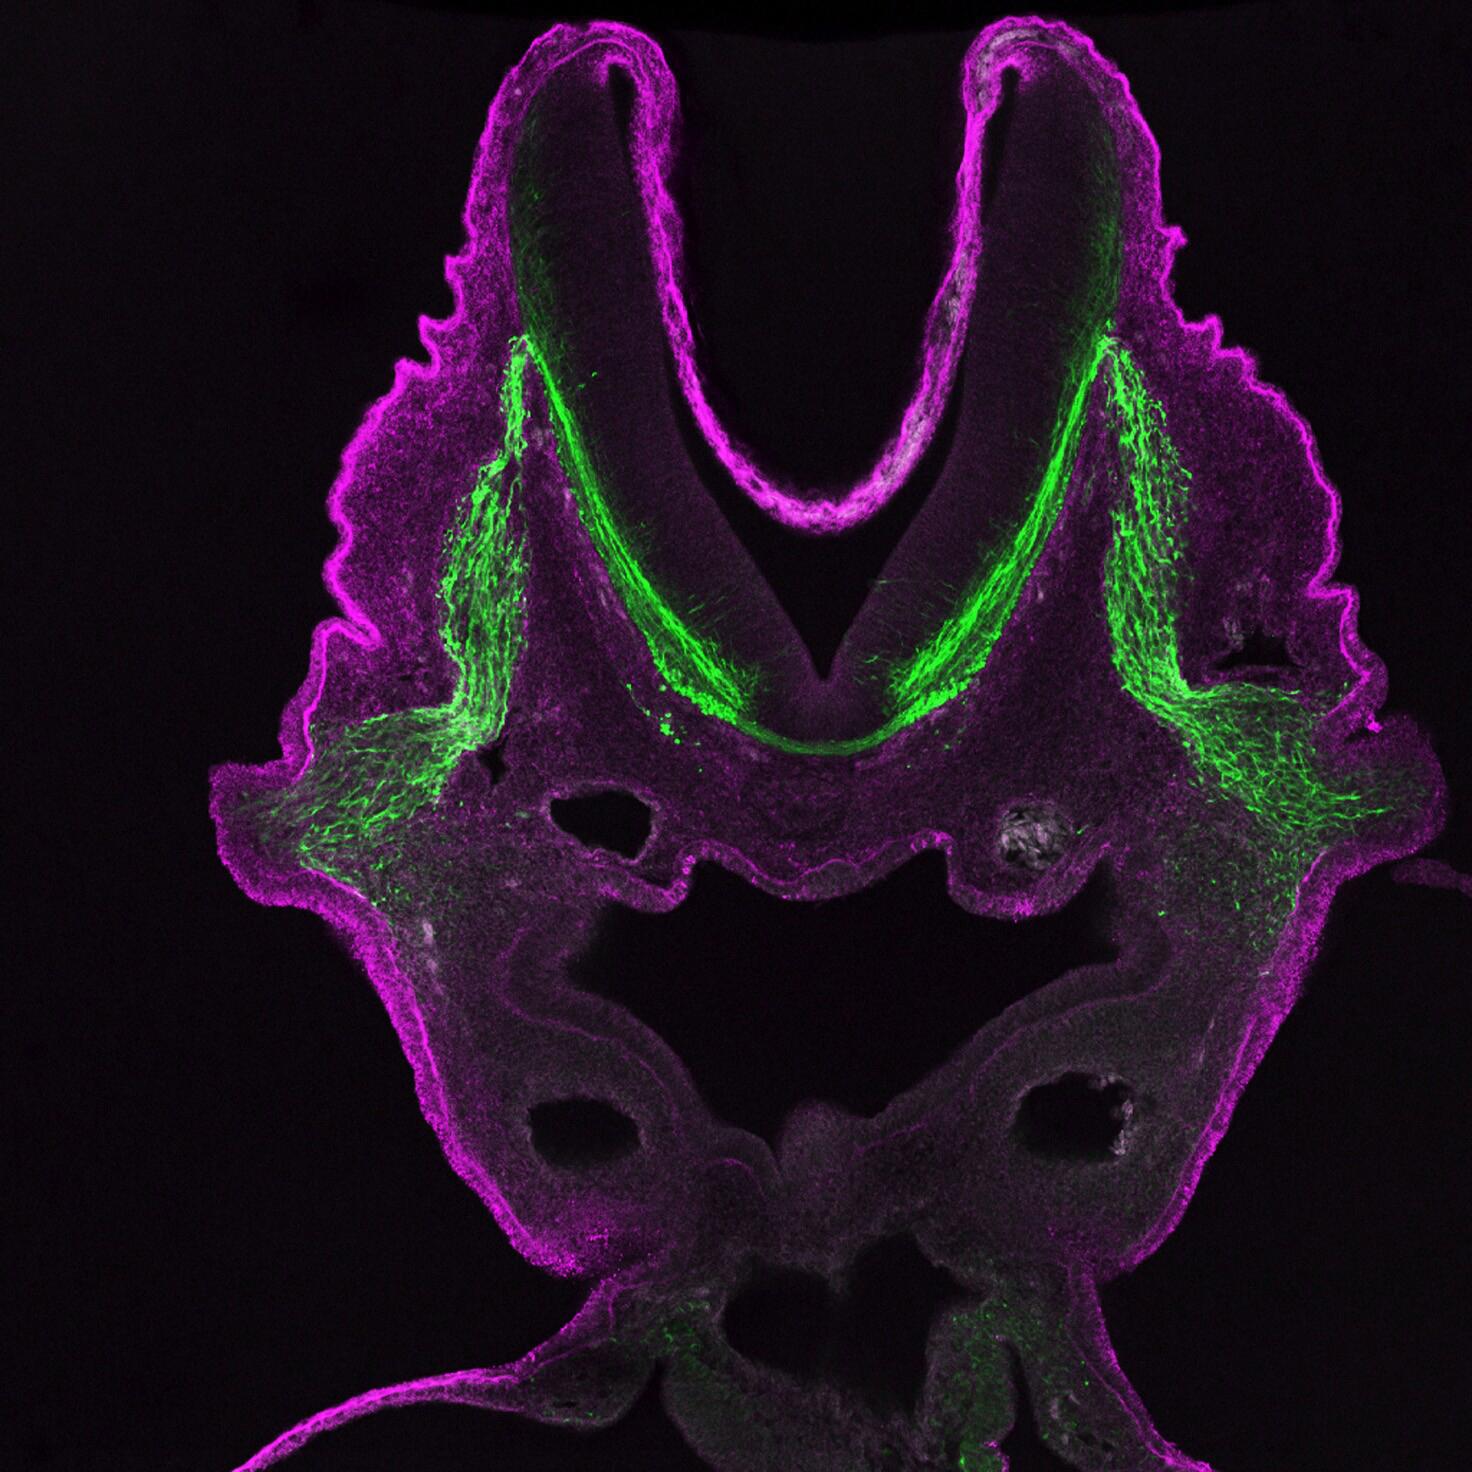  A developing cranial ganglion viewed under a fluorescent microscope.